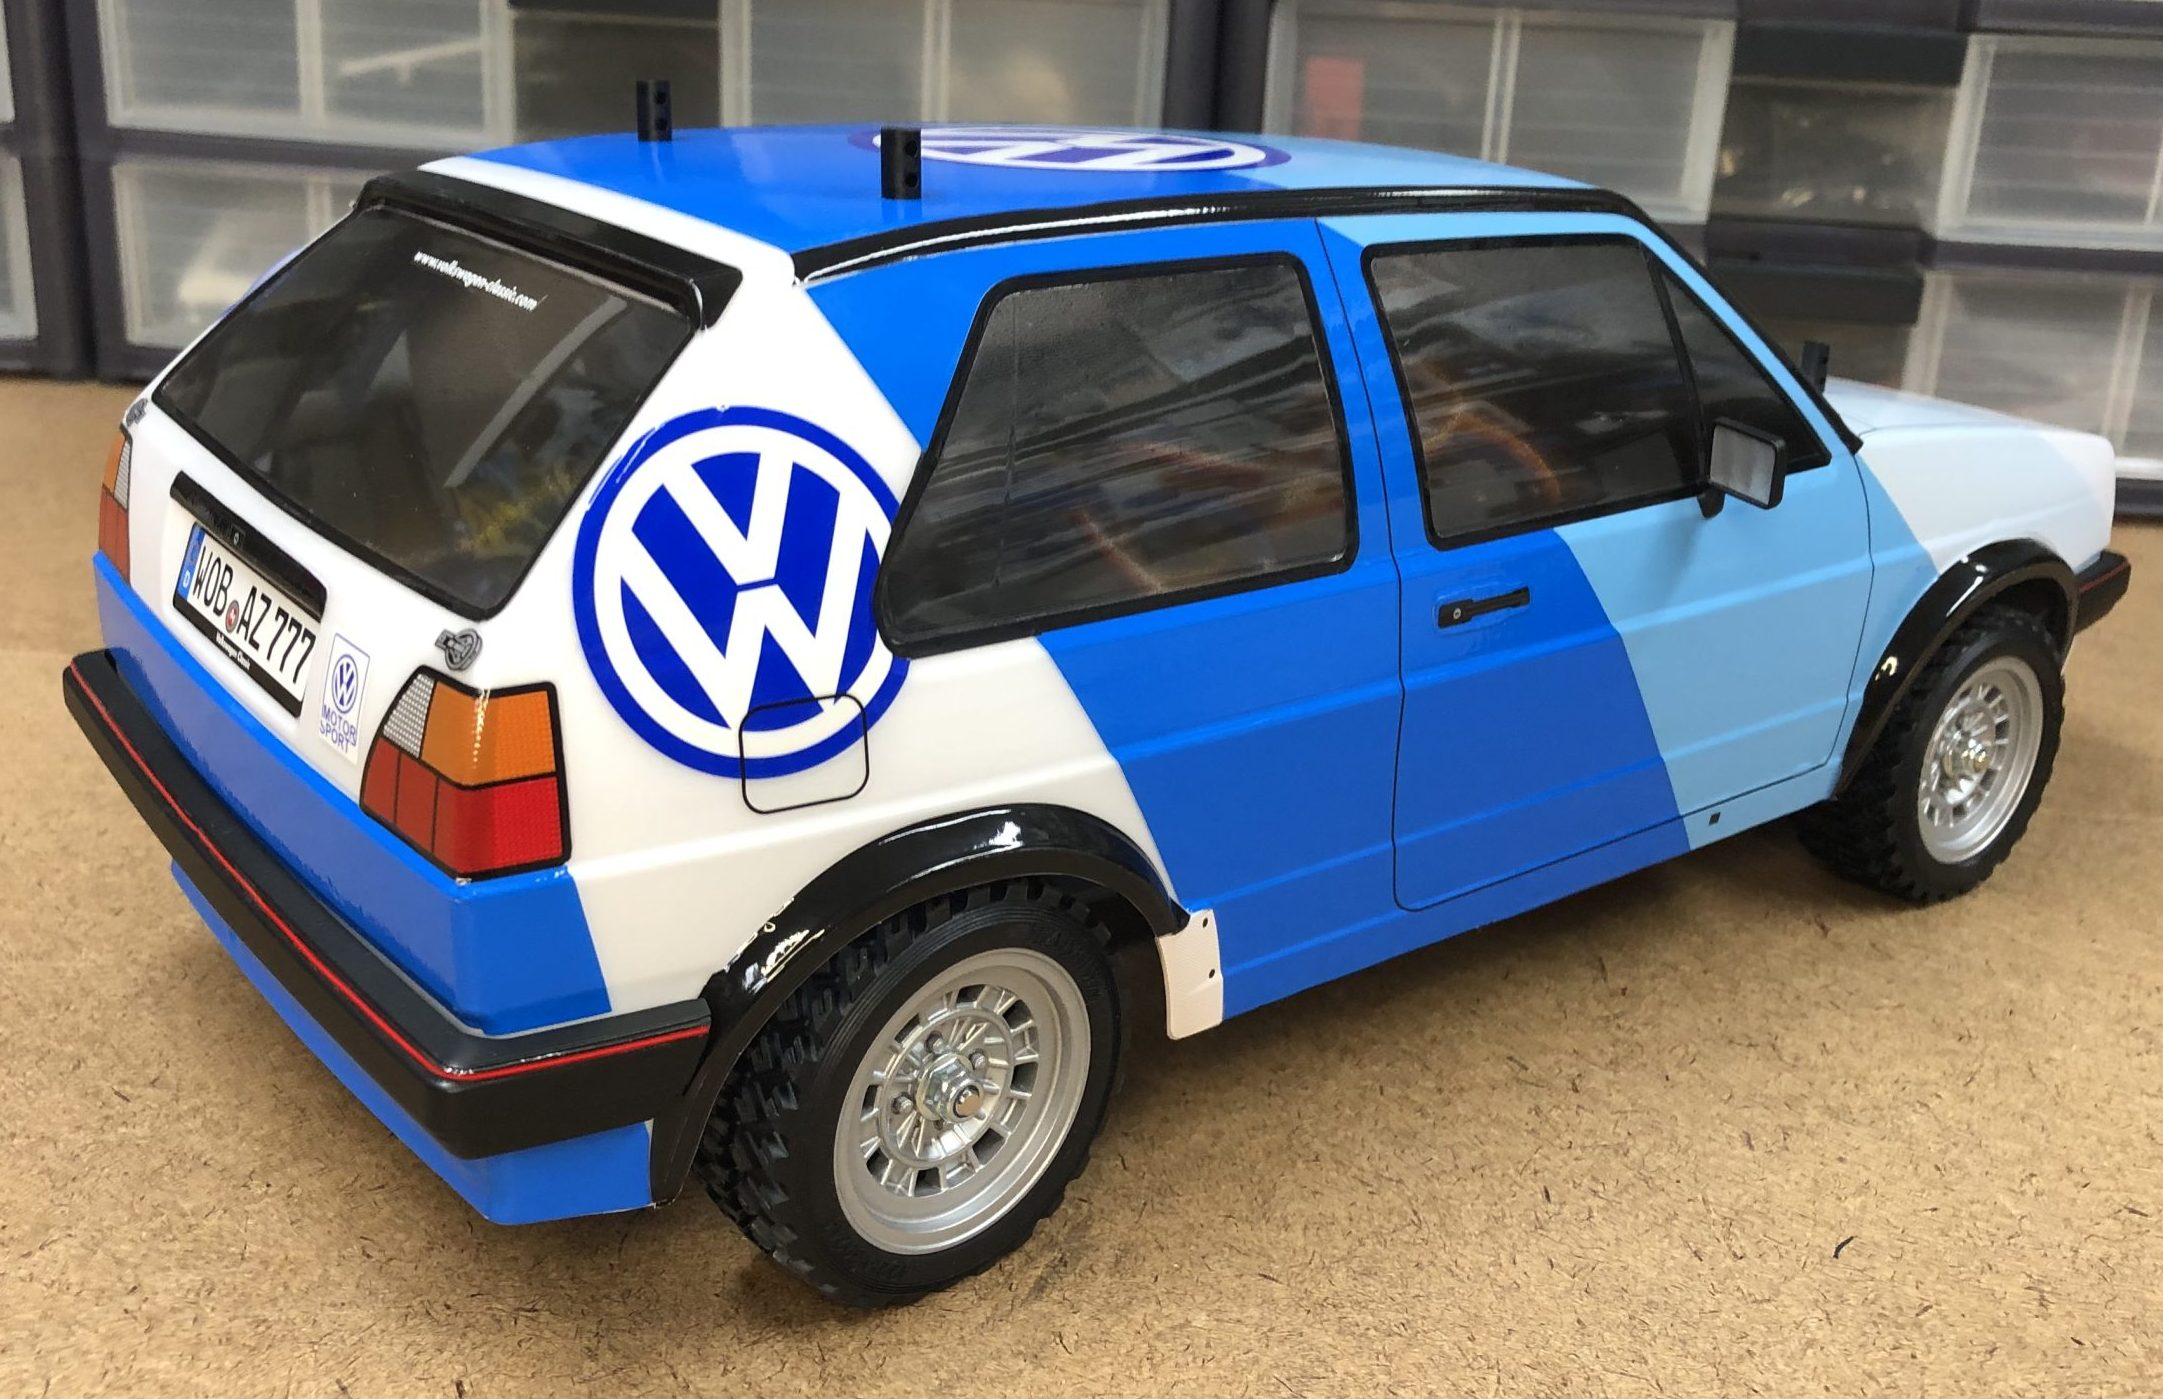 Painting And Detailing The Tamiya VW Golf II Rally – Part 2